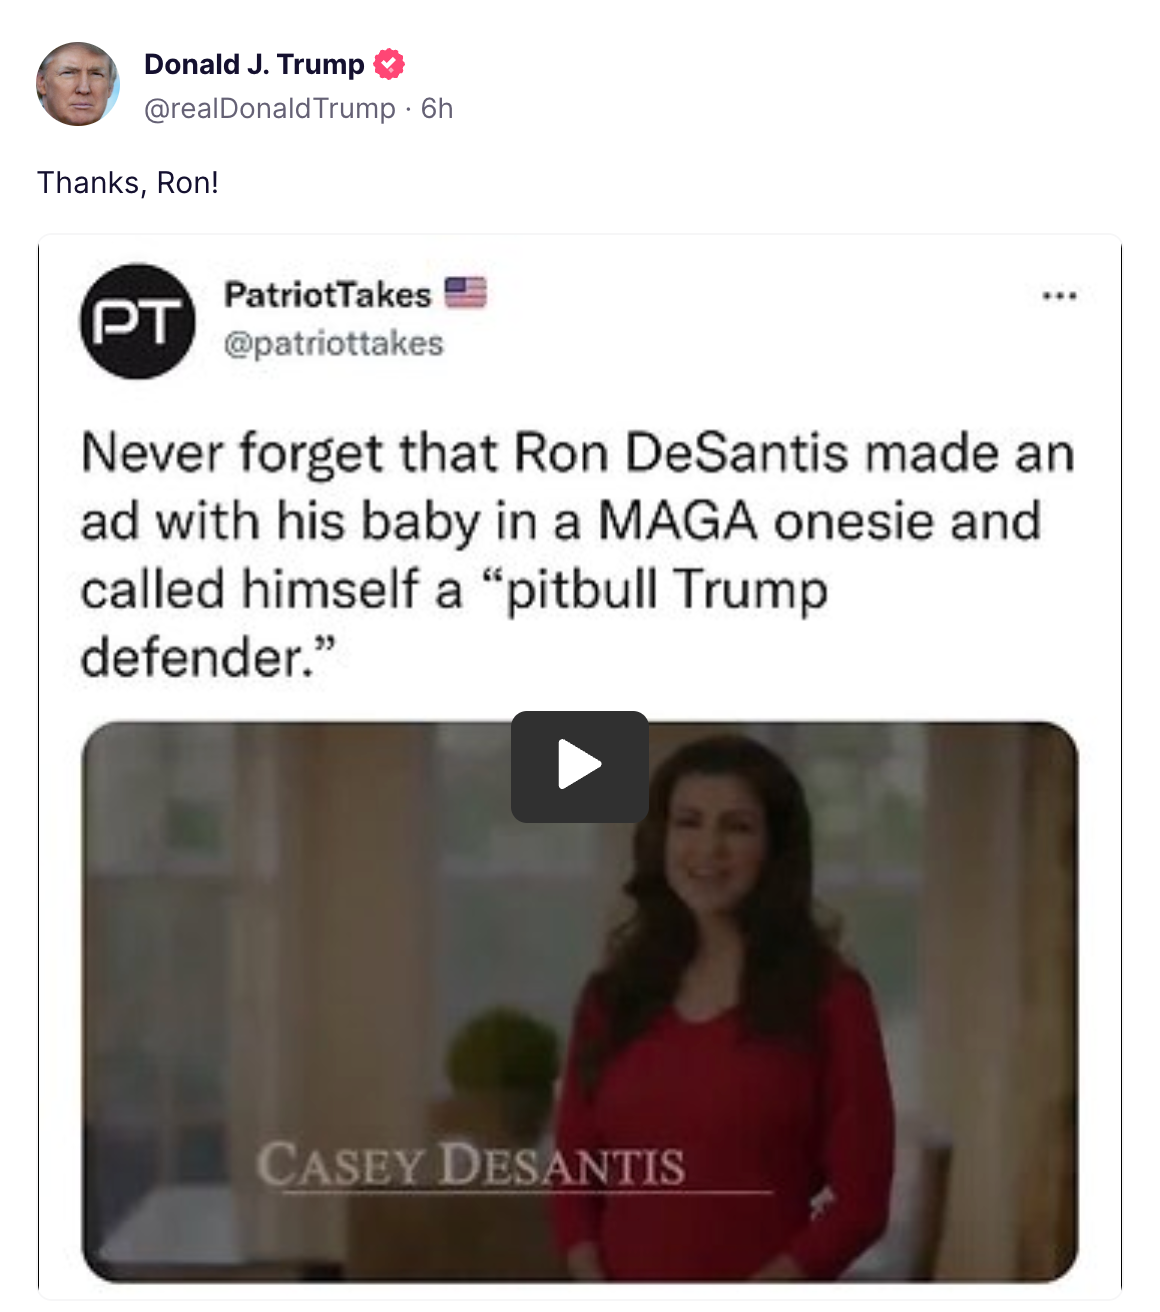 Trump mocked DeSantis by resharing a 2018 campaign video with heavy praise of the one-time president